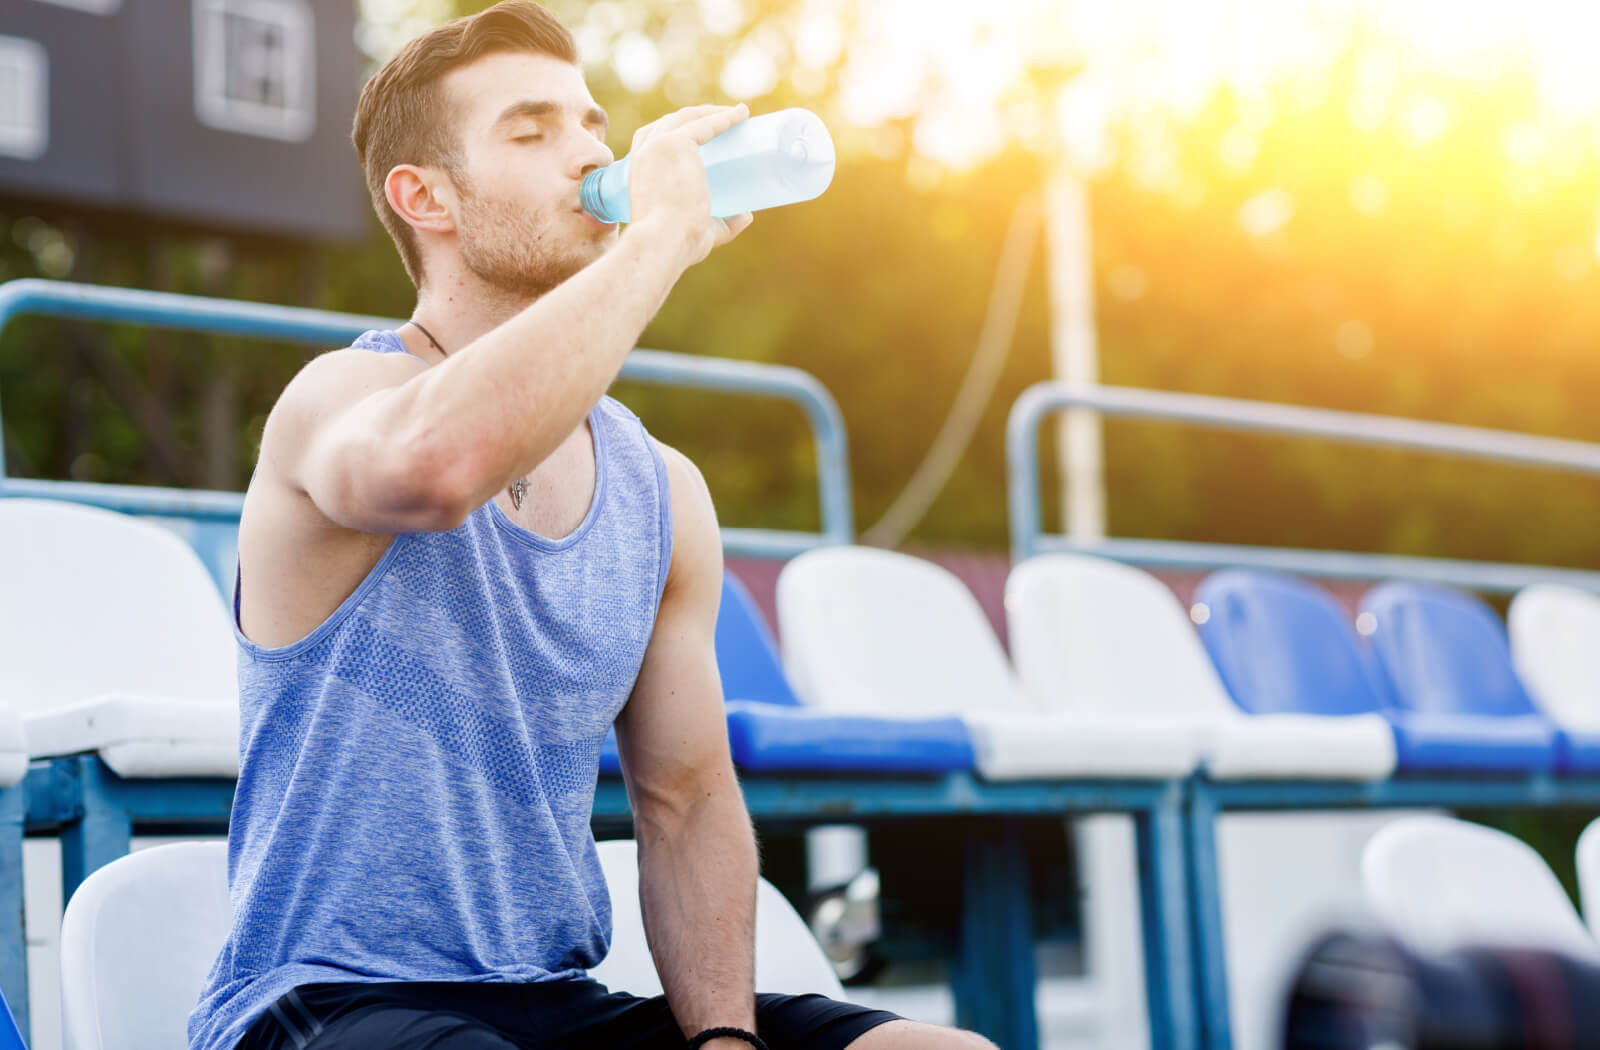 A man drinking water from a plastic bottle after working out.